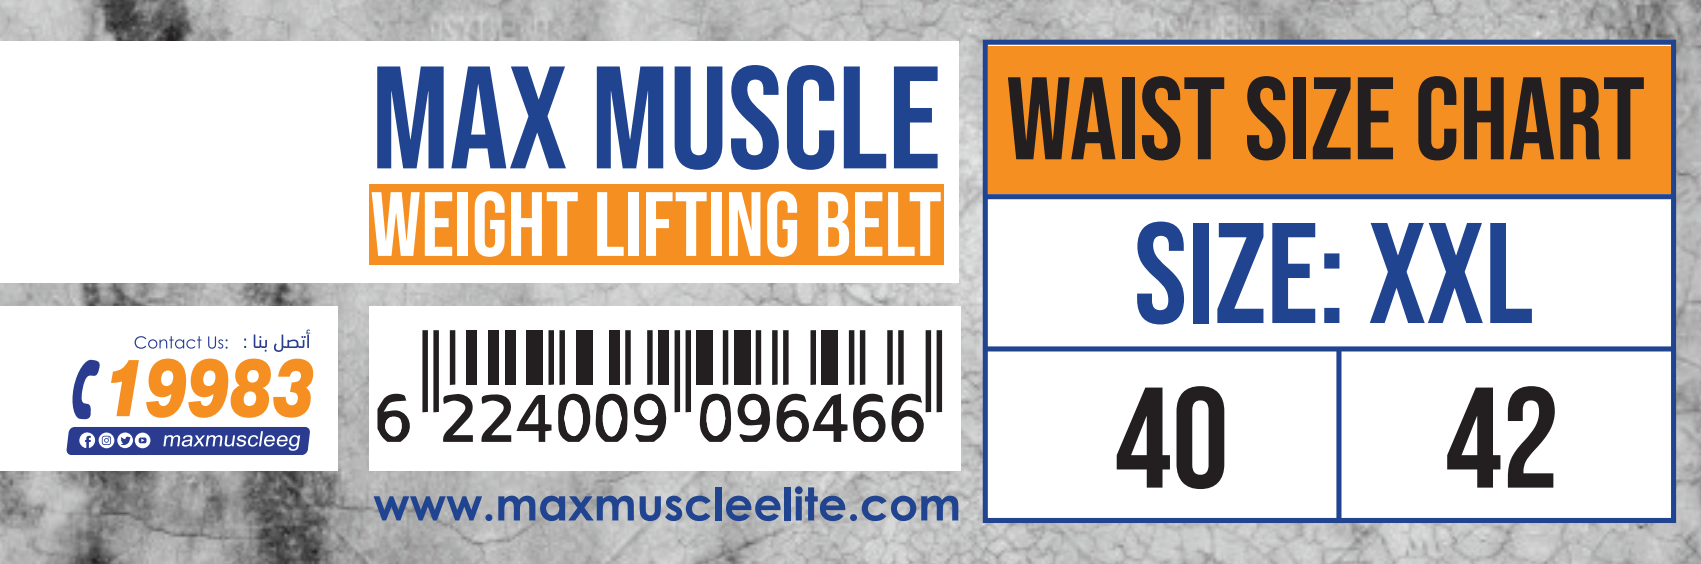 Max muscle weightlifting Belt-XXL